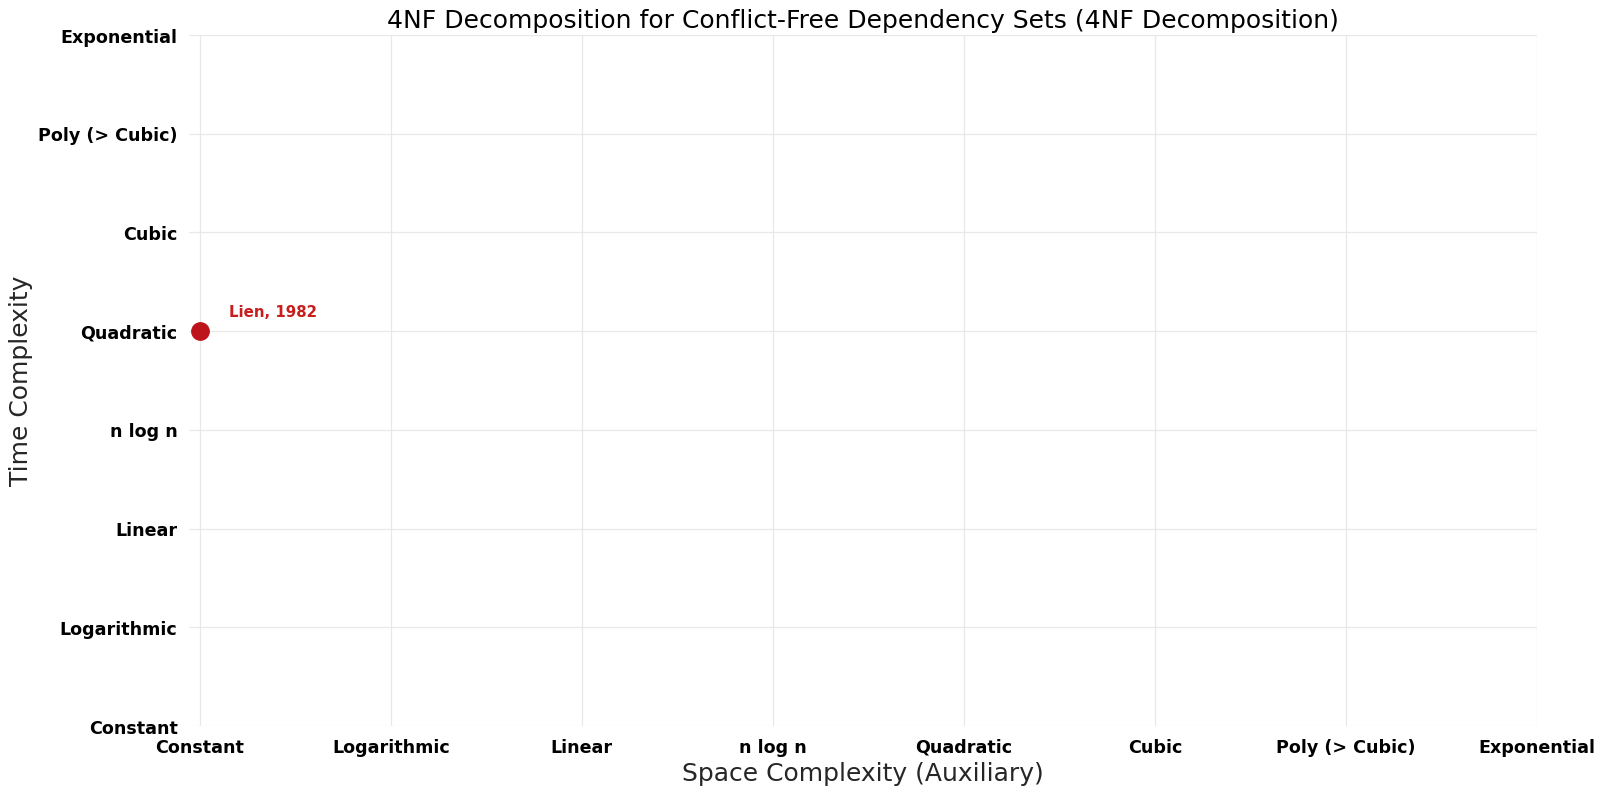 File:4NF Decomposition - 4NF Decomposition for Conflict-Free Dependency Sets - Pareto Frontier.png